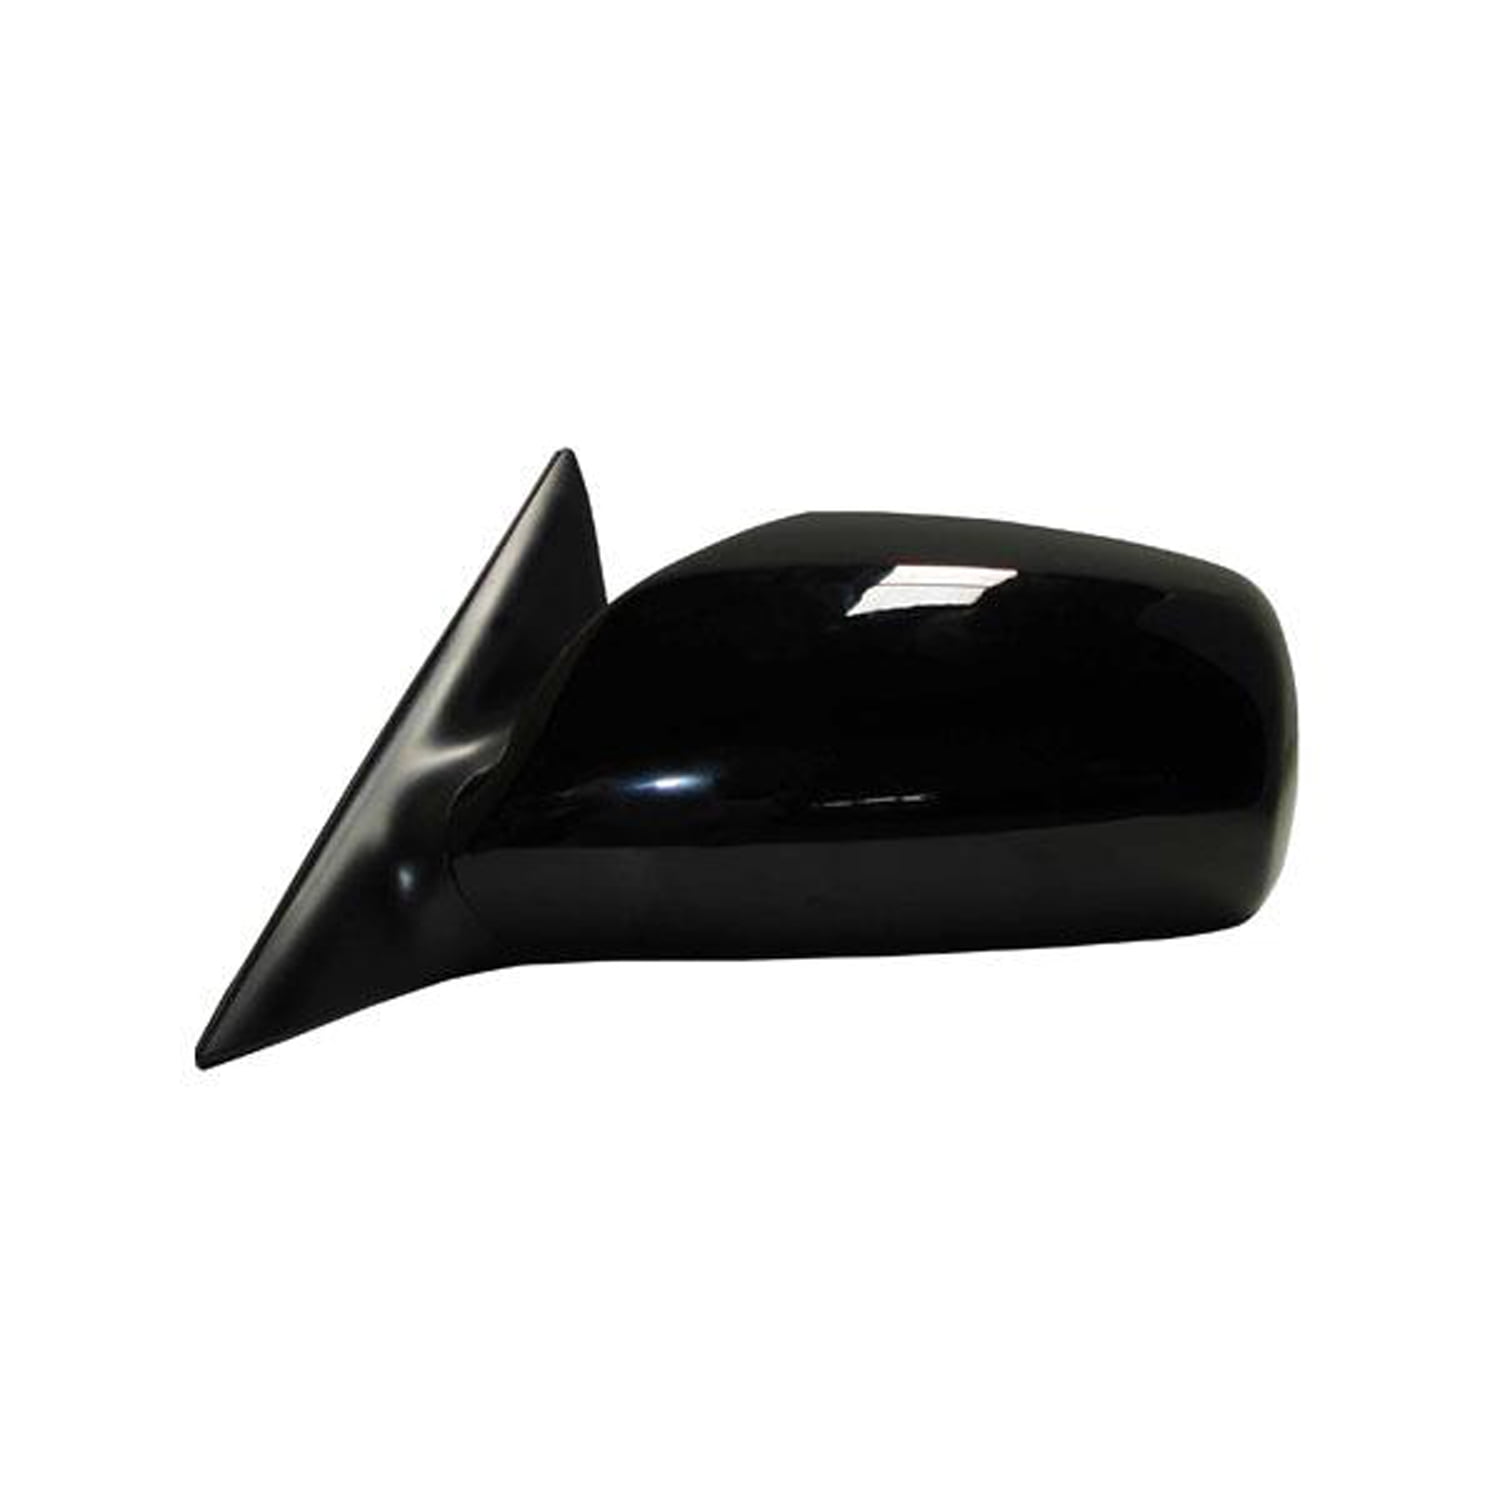 DNA Motoring OEM-MR-TO1320215 Left Side View Door Mirror Power Non-Heated Compatible with 2007-2011 Toyota Camry USA Built Models